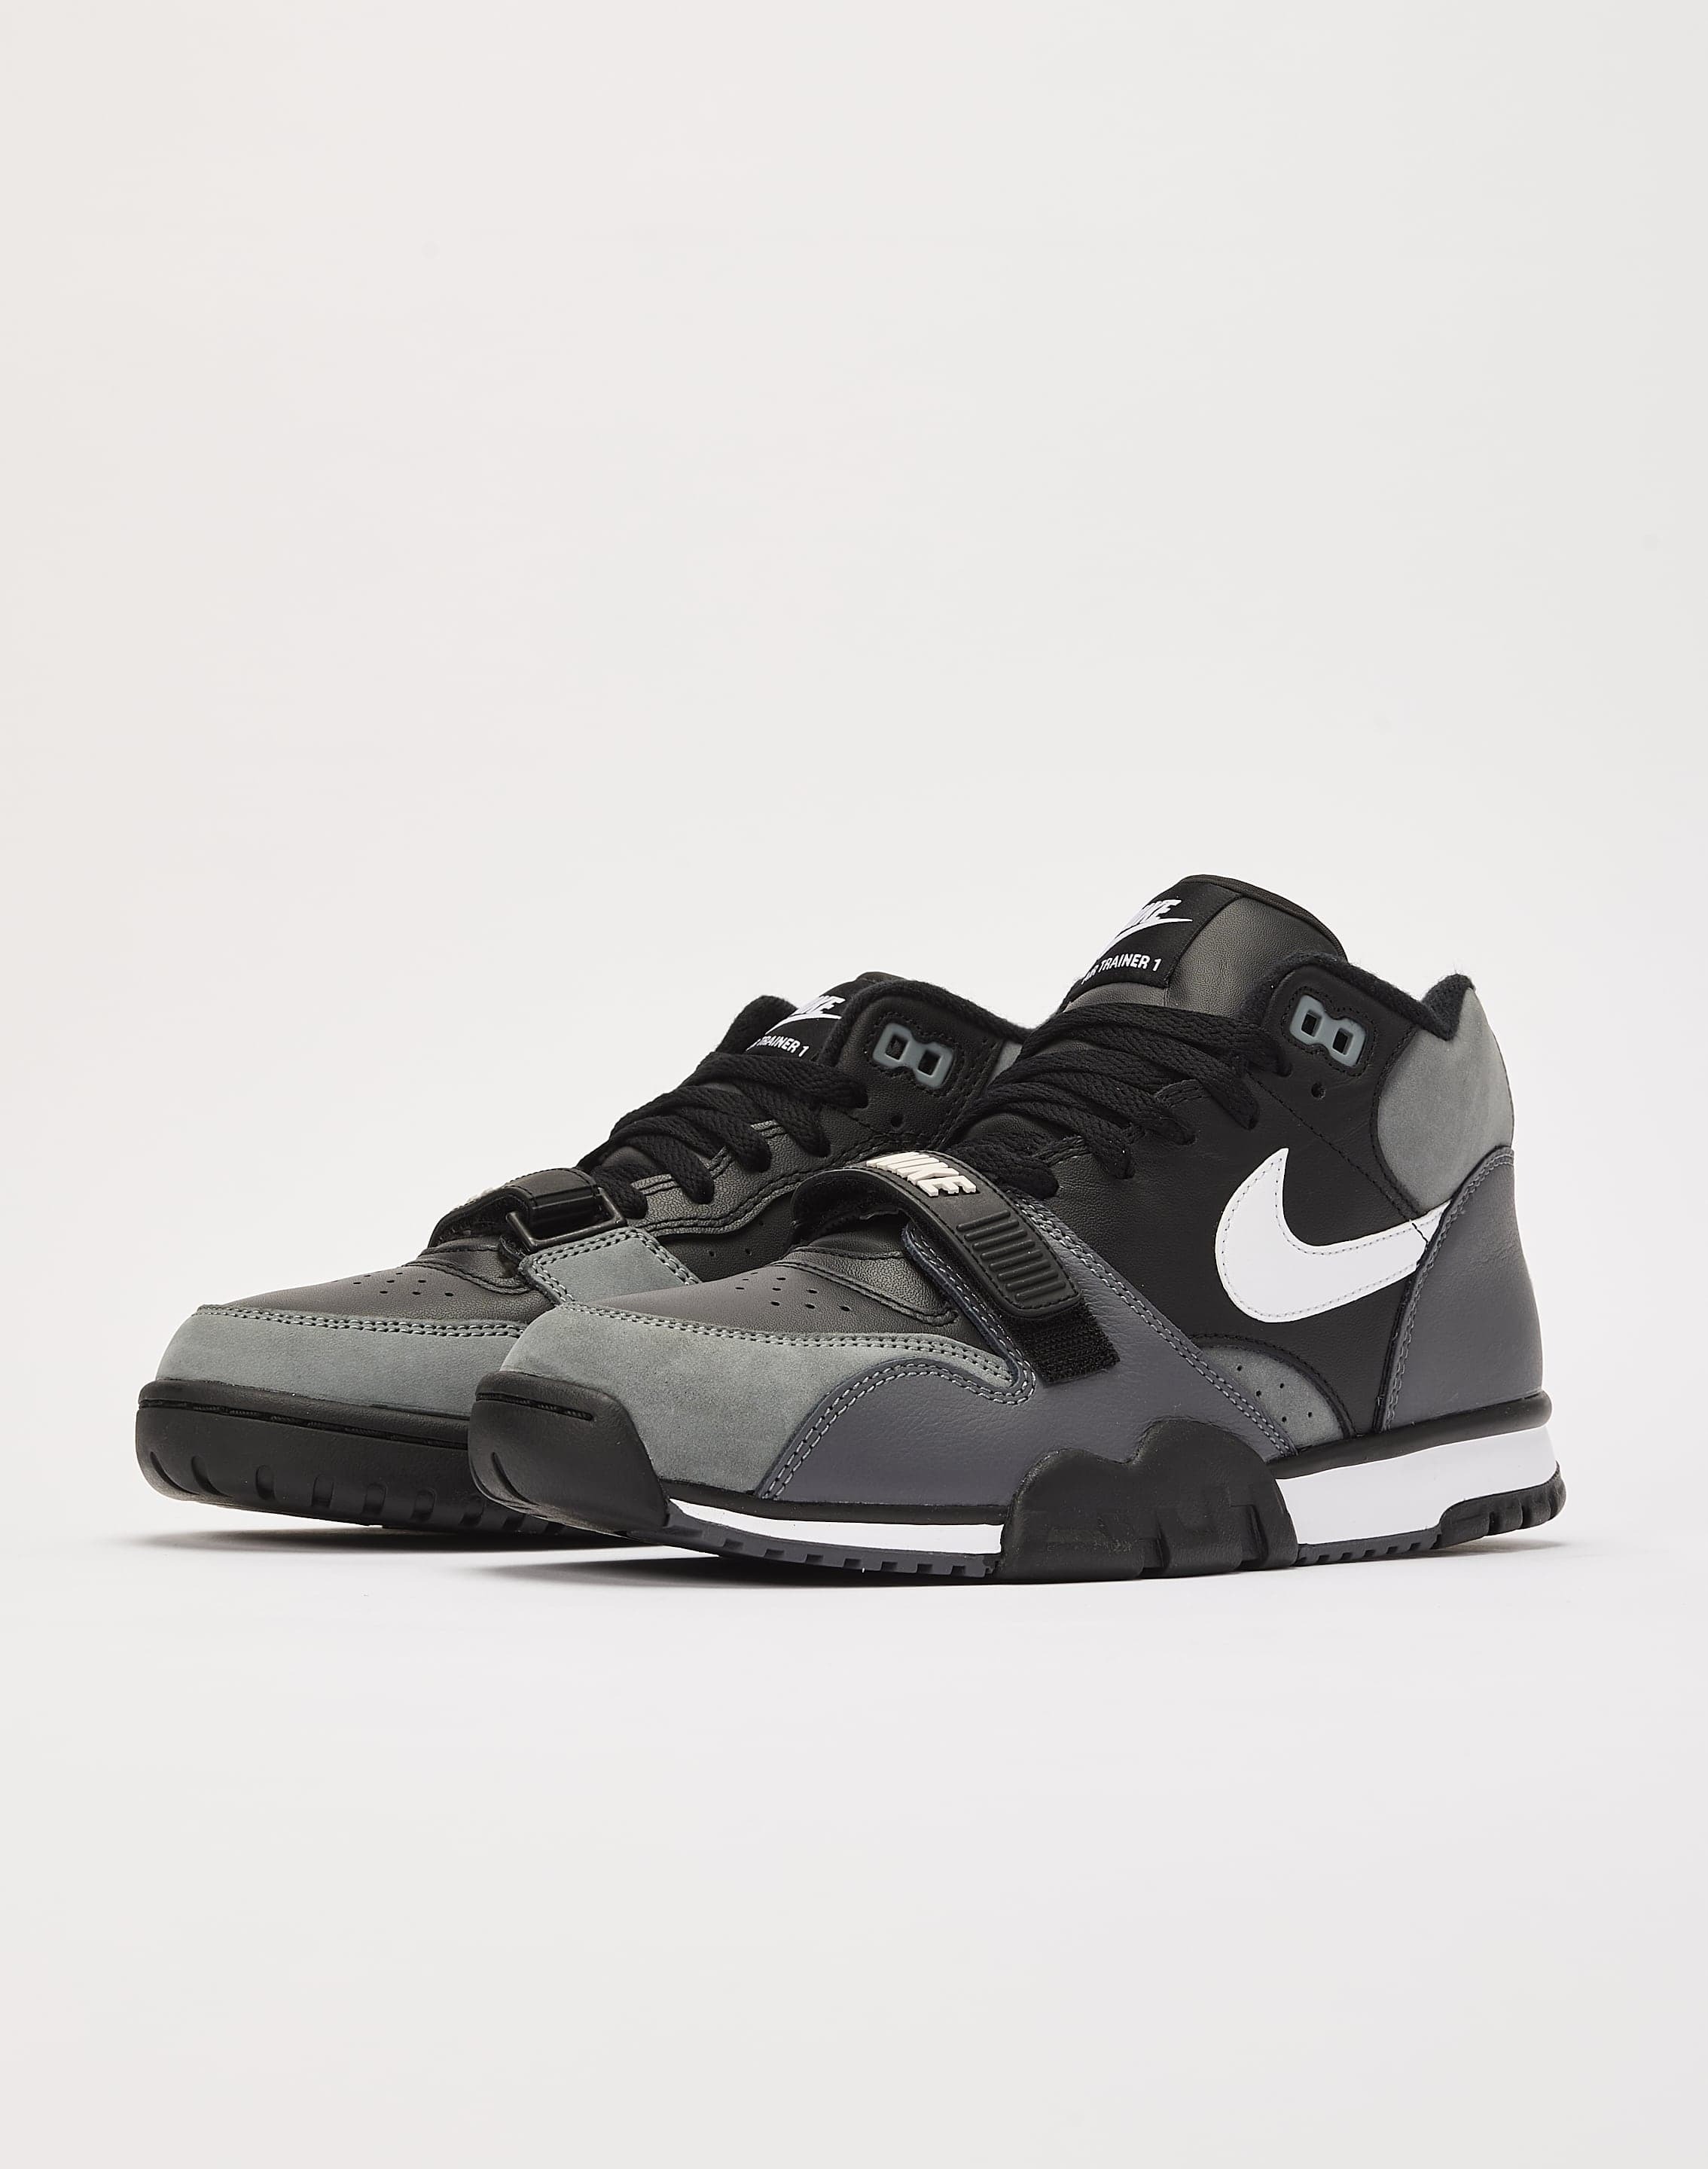 MENS NIKE AIR TRAINER 1 “Black White” Dropped on DTLR